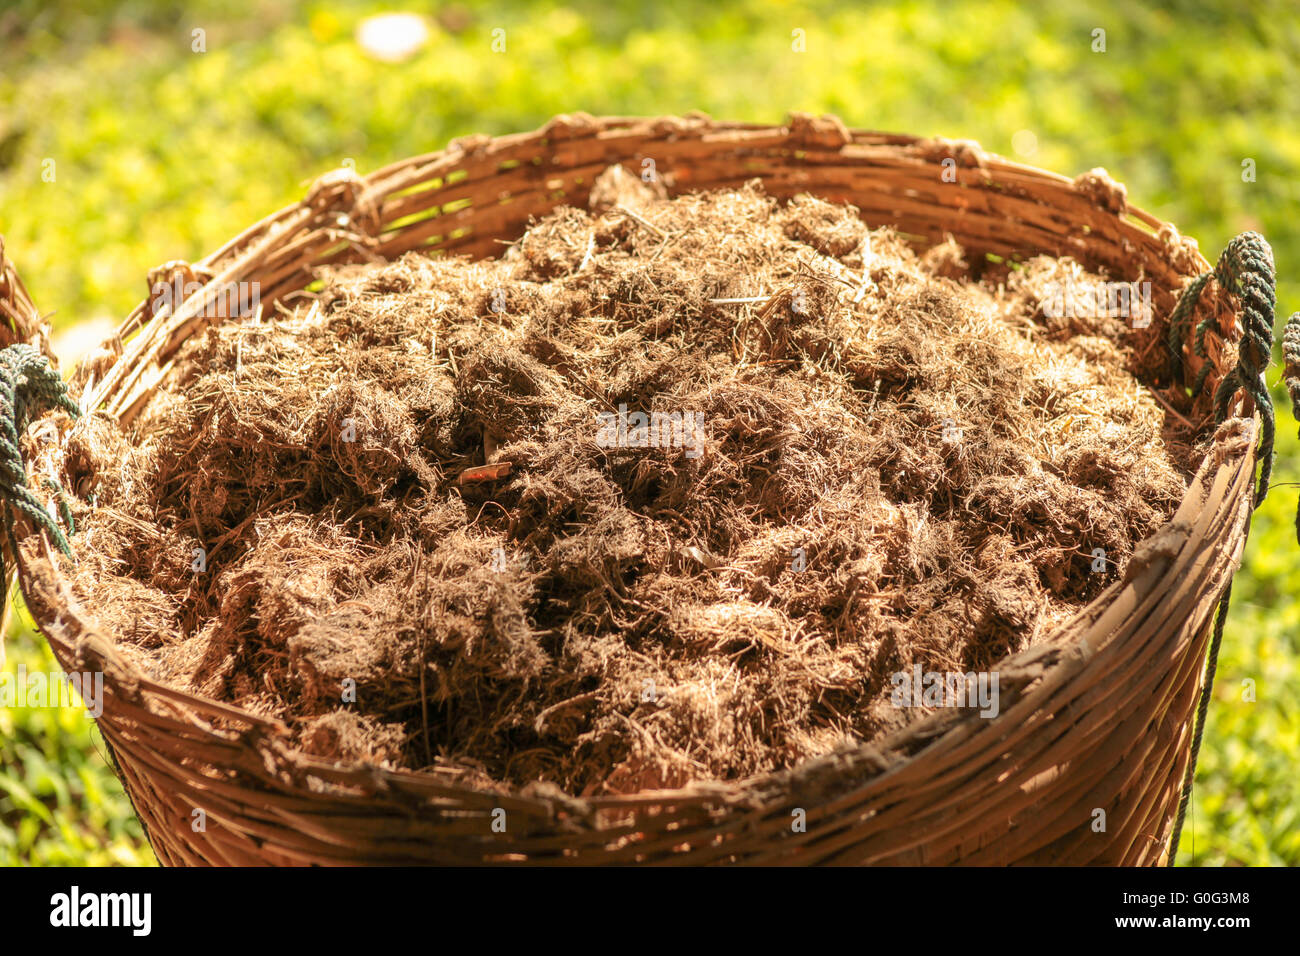 Basket of elephant poo fiber ready for making paper Stock Photo